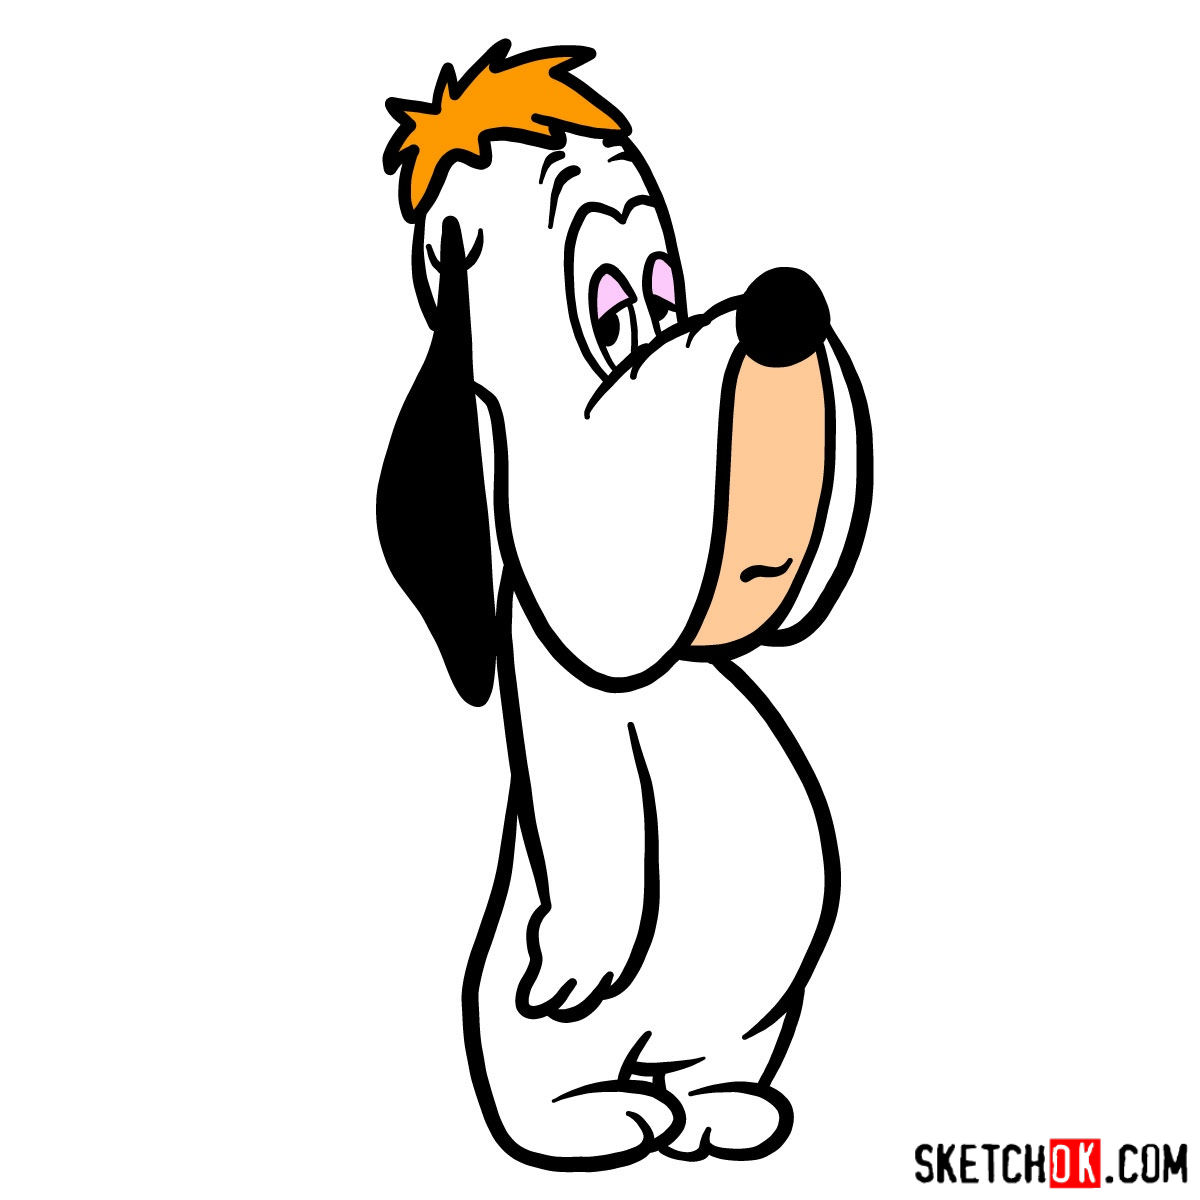 How to draw Droopy Dog - Sketchok easy drawing guides